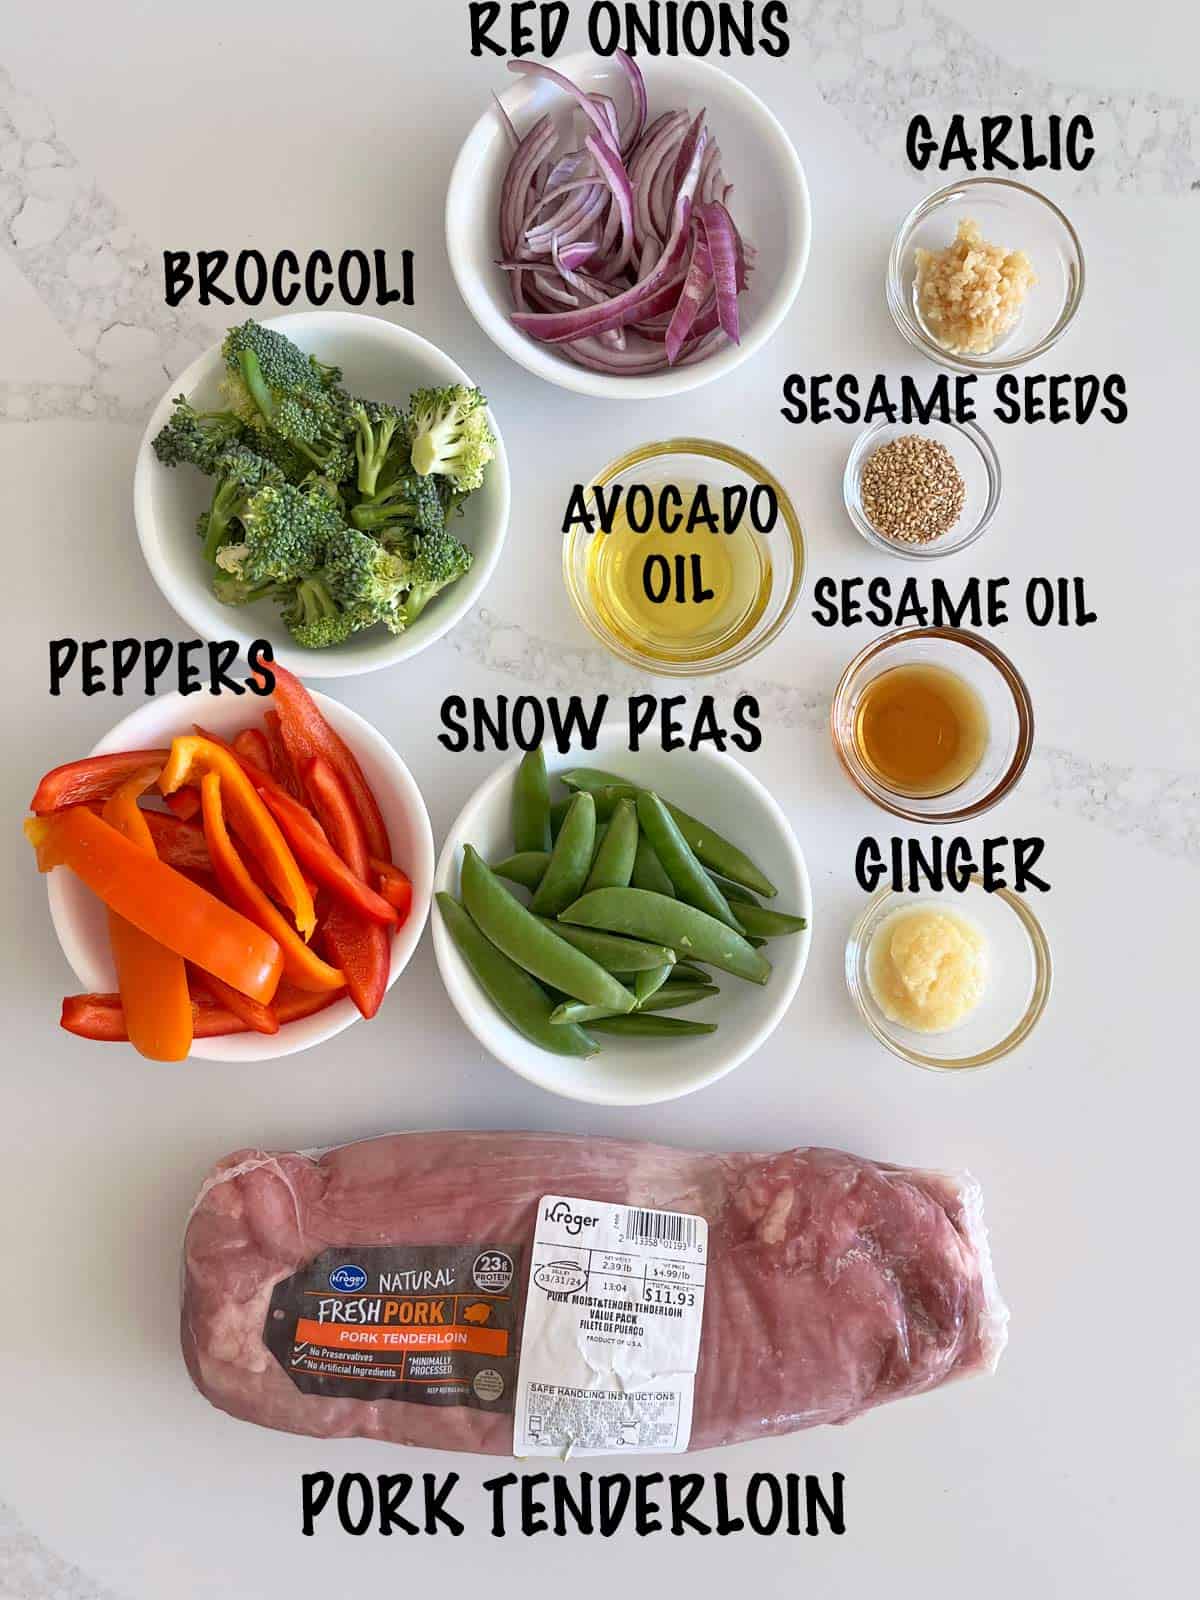 The ingredients needed to make a pork stir-fry.